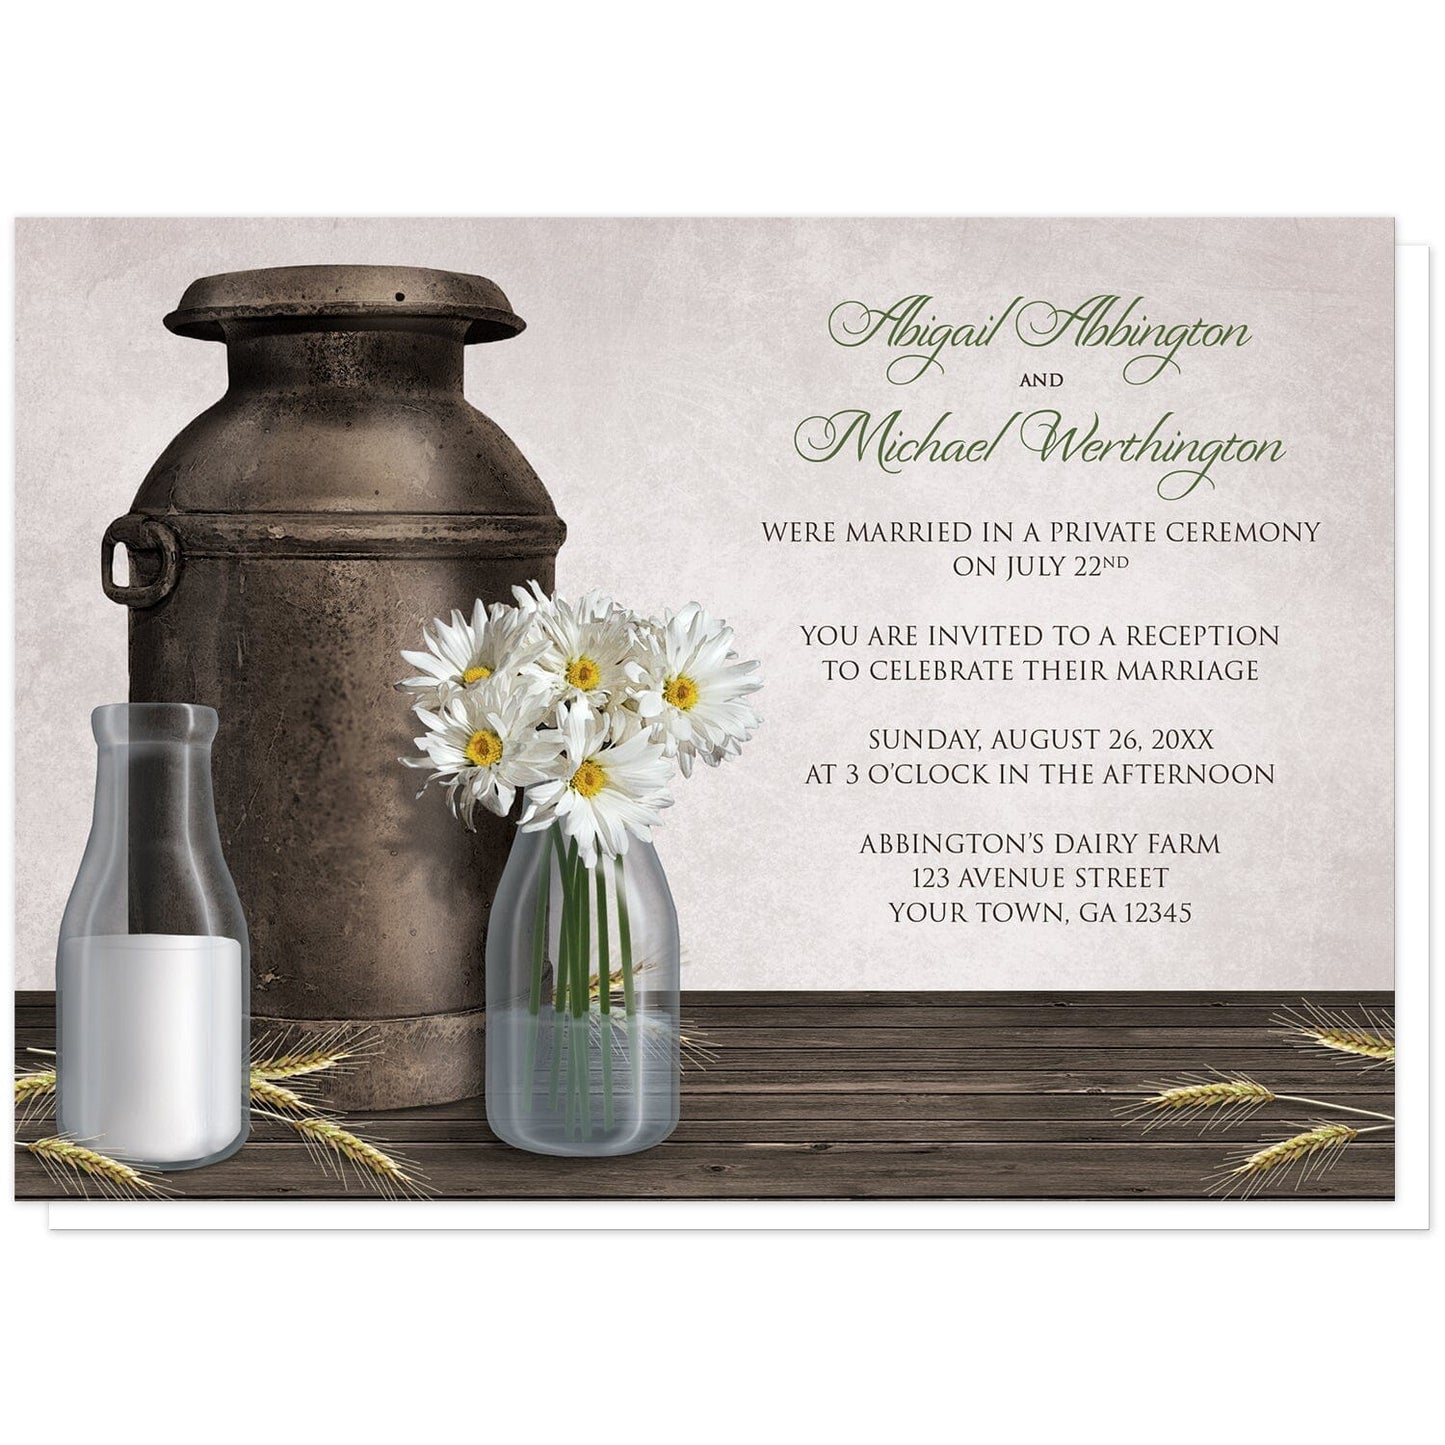 Rustic Country Dairy Farm Reception Only Invitations at Artistically Invited. Rustic country dairy farm reception only invitations with an illustration of an antique milk can, two milk bottles (one with milk, the other with white daisies and water) on a dark wood tabletop with hay stems. Your personalized post-wedding reception details are custom printed in brown and green over a light parchment-colored background.